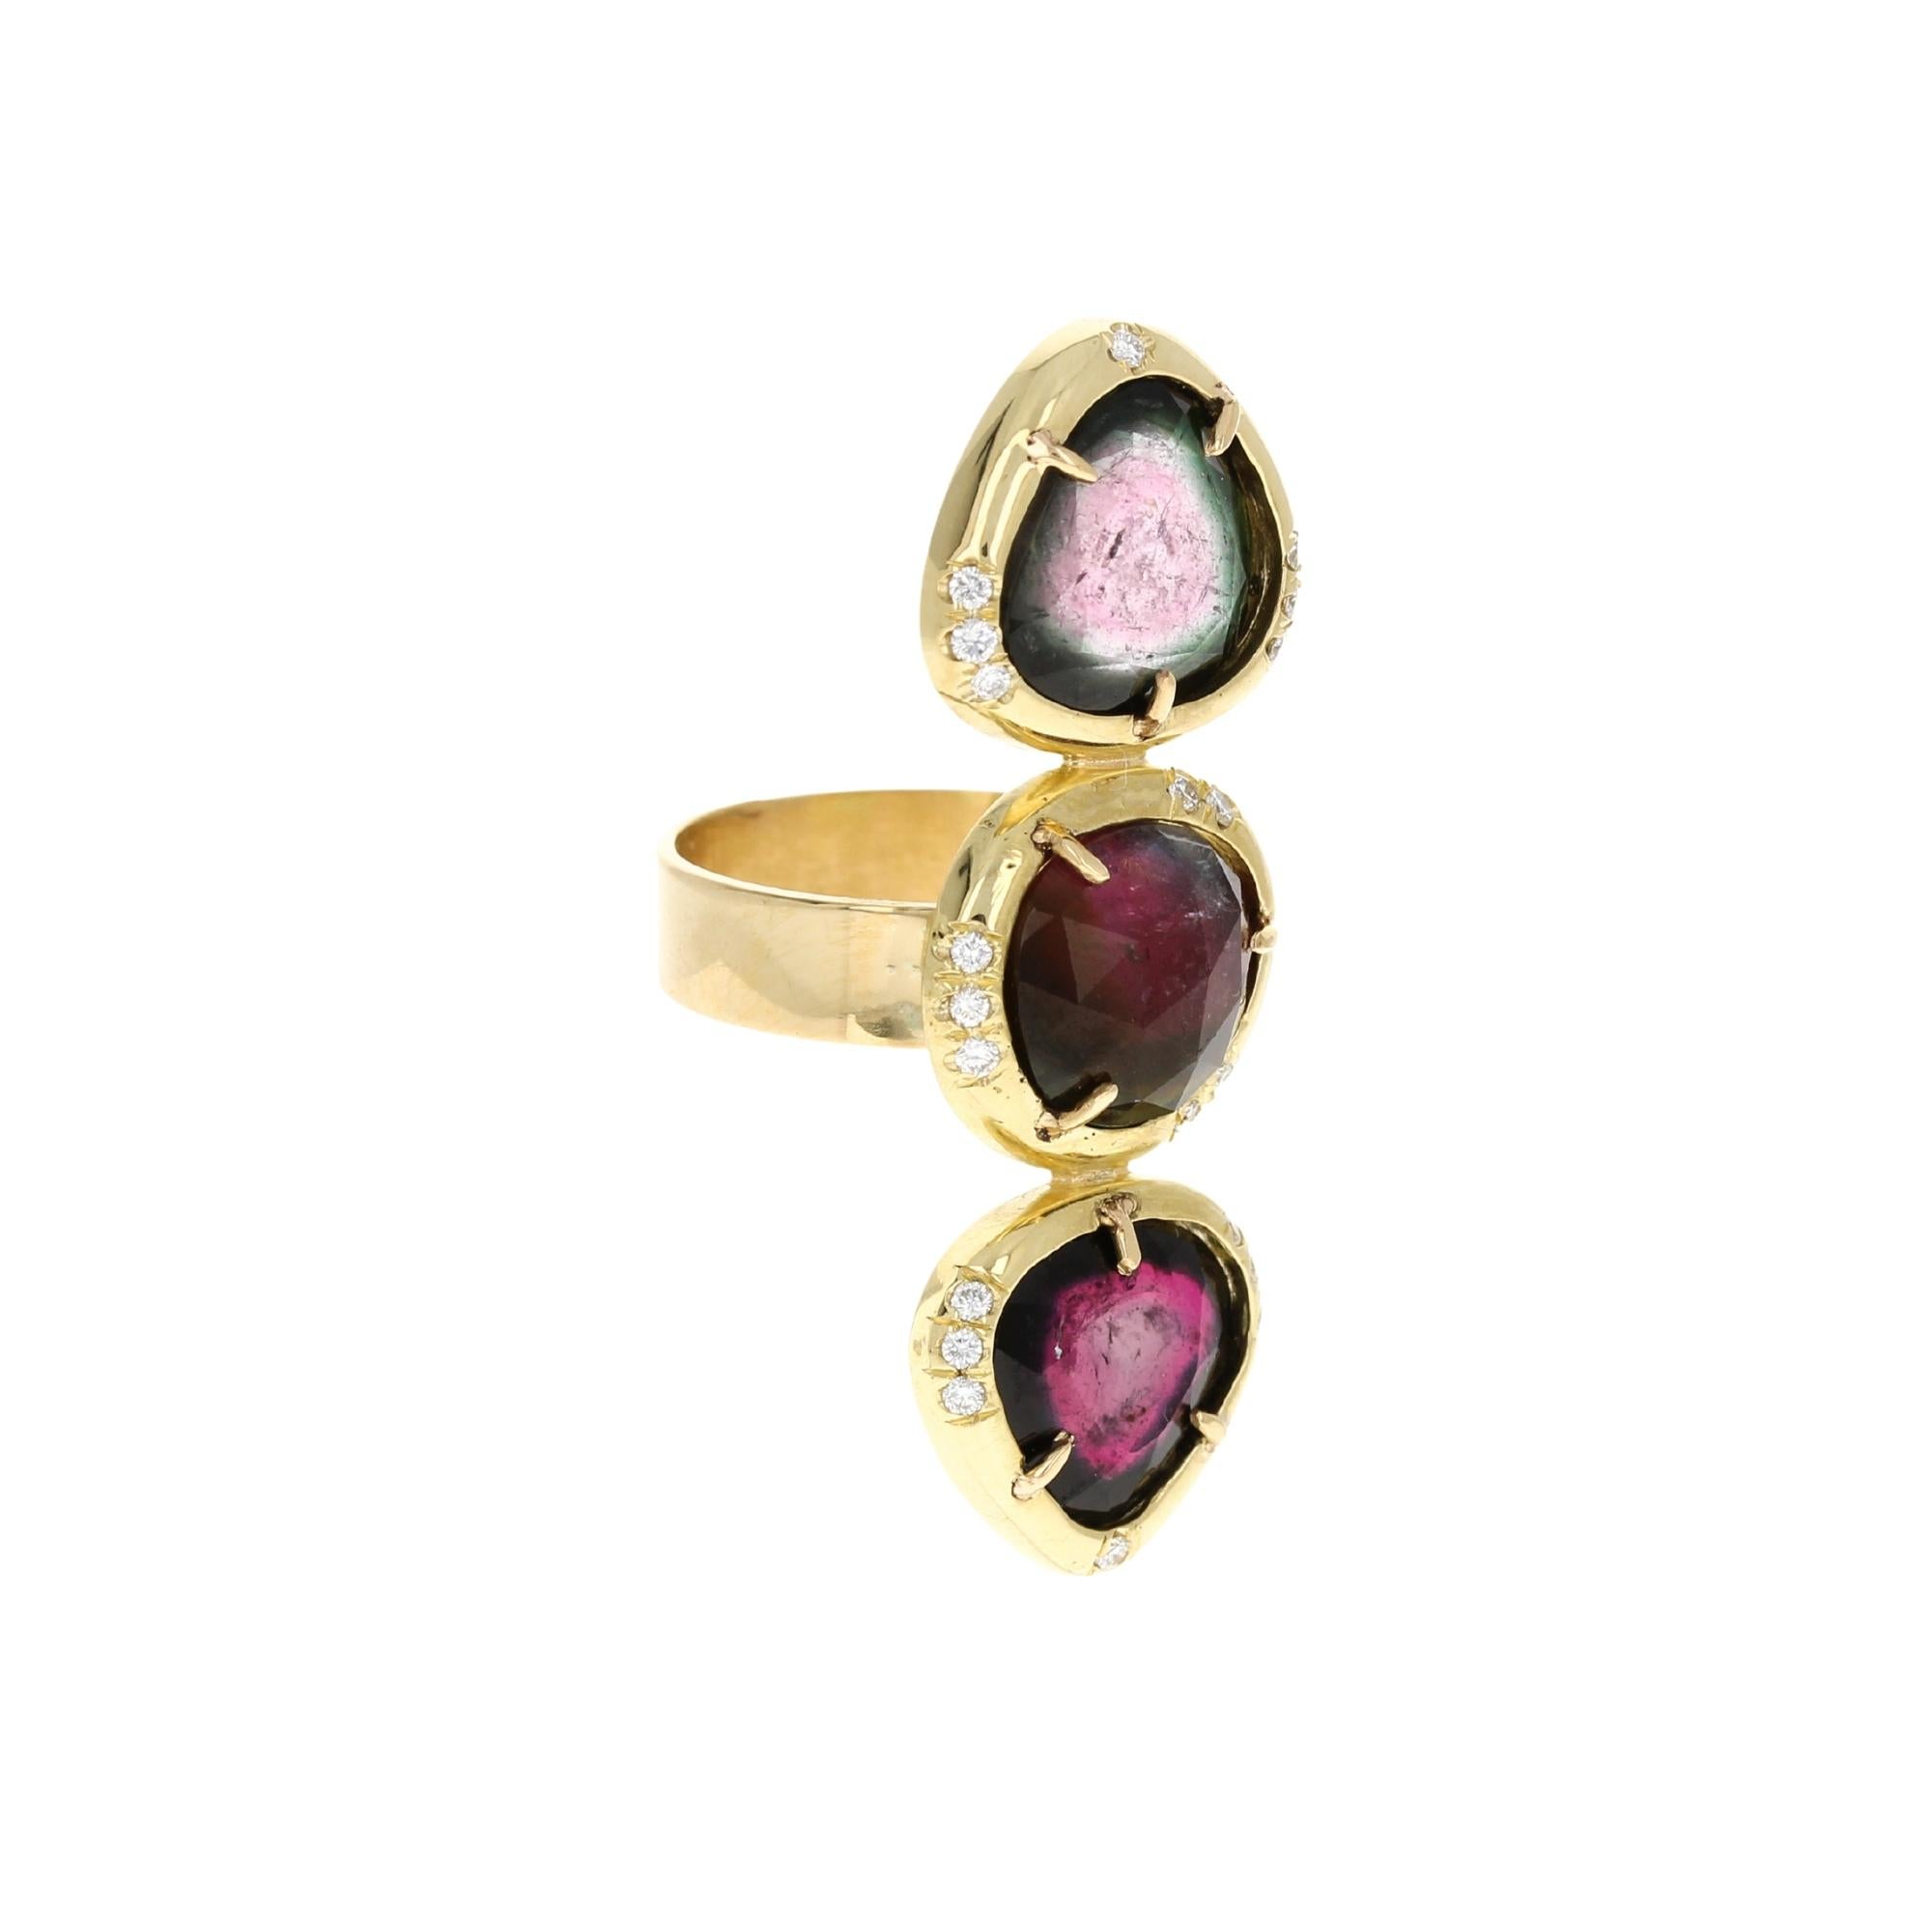 The Alexa Ring is a one of a kind & handcrafted in 18kt yellow gold with three sparkling natural bicolor tourmalines and 0.19ct TW pavé diamonds.